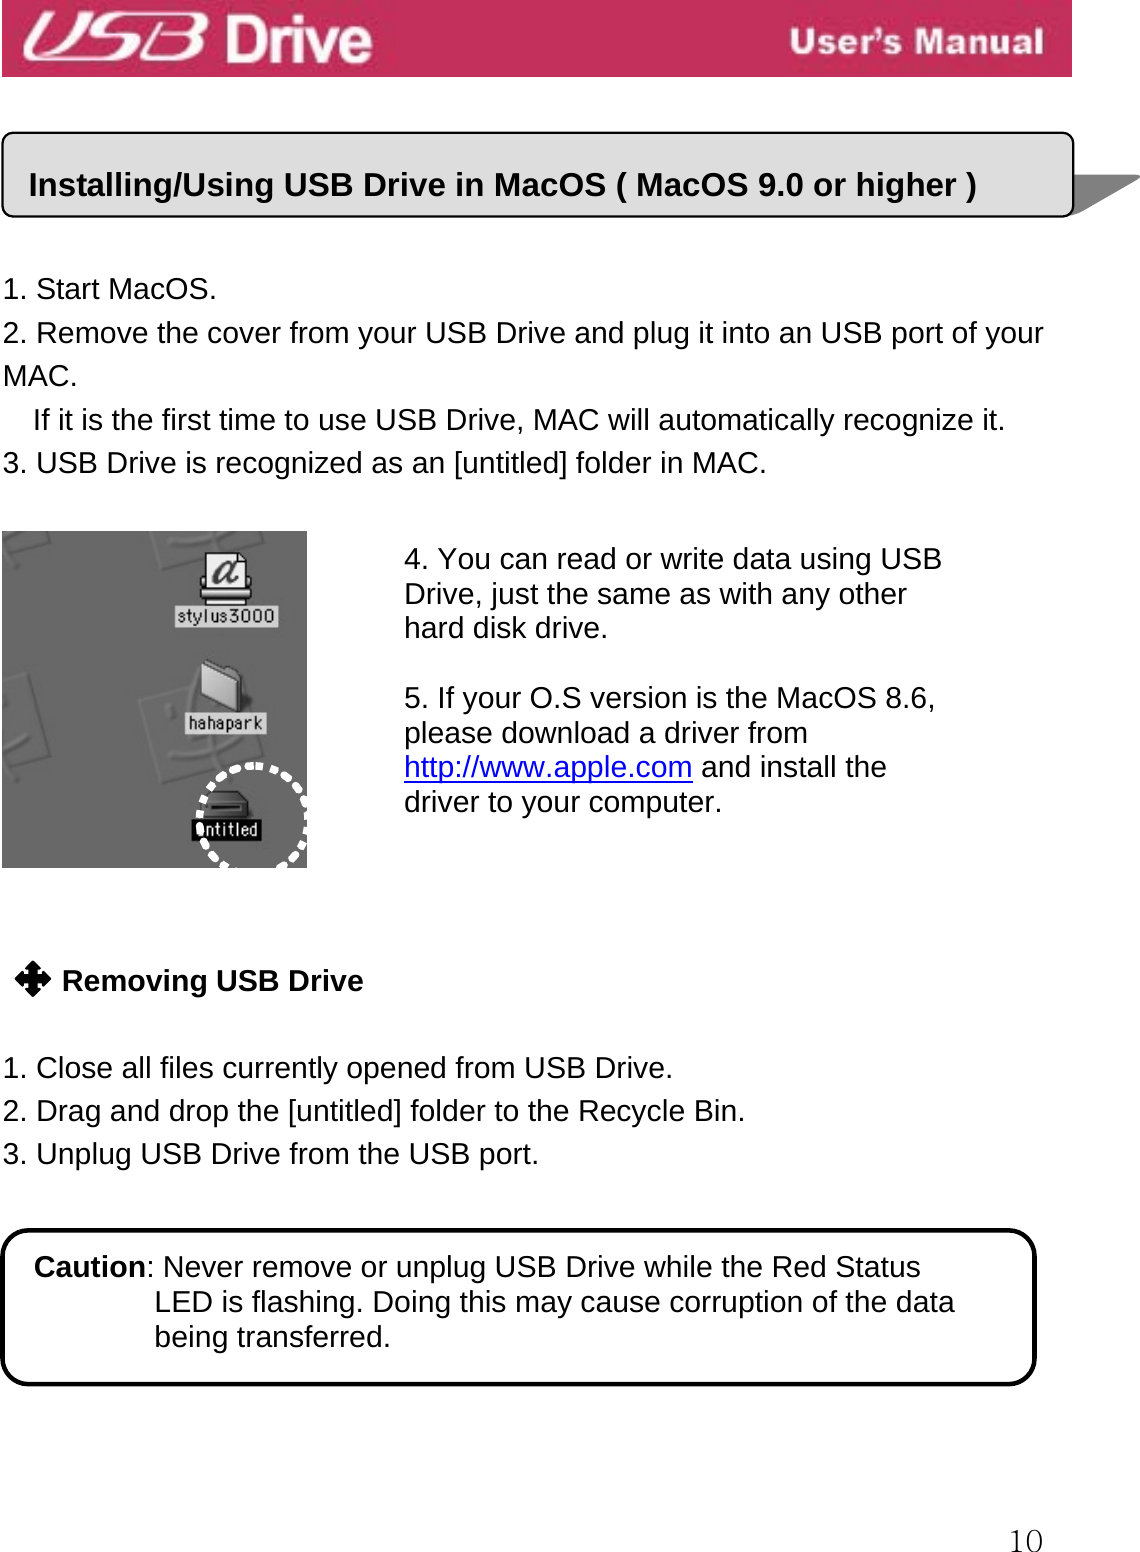  10      1. Start MacOS. 2. Remove the cover from your USB Drive and plug it into an USB port of your MAC. If it is the first time to use USB Drive, MAC will automatically recognize it. 3. USB Drive is recognized as an [untitled] folder in MAC.       Removing USB Drive  1. Close all files currently opened from USB Drive. 2. Drag and drop the [untitled] folder to the Recycle Bin. 3. Unplug USB Drive from the USB port.        Installing/Using USB Drive in MacOS ( MacOS 9.0 or higher )Caution: Never remove or unplug USB Drive while the Red Status   LED is flashing. Doing this may cause corruption of the data being transferred. 4. You can read or write data using USB Drive, just the same as with any other hard disk drive.  5. If your O.S version is the MacOS 8.6, please download a driver from   http://www.apple.com and install the driver to your computer. 